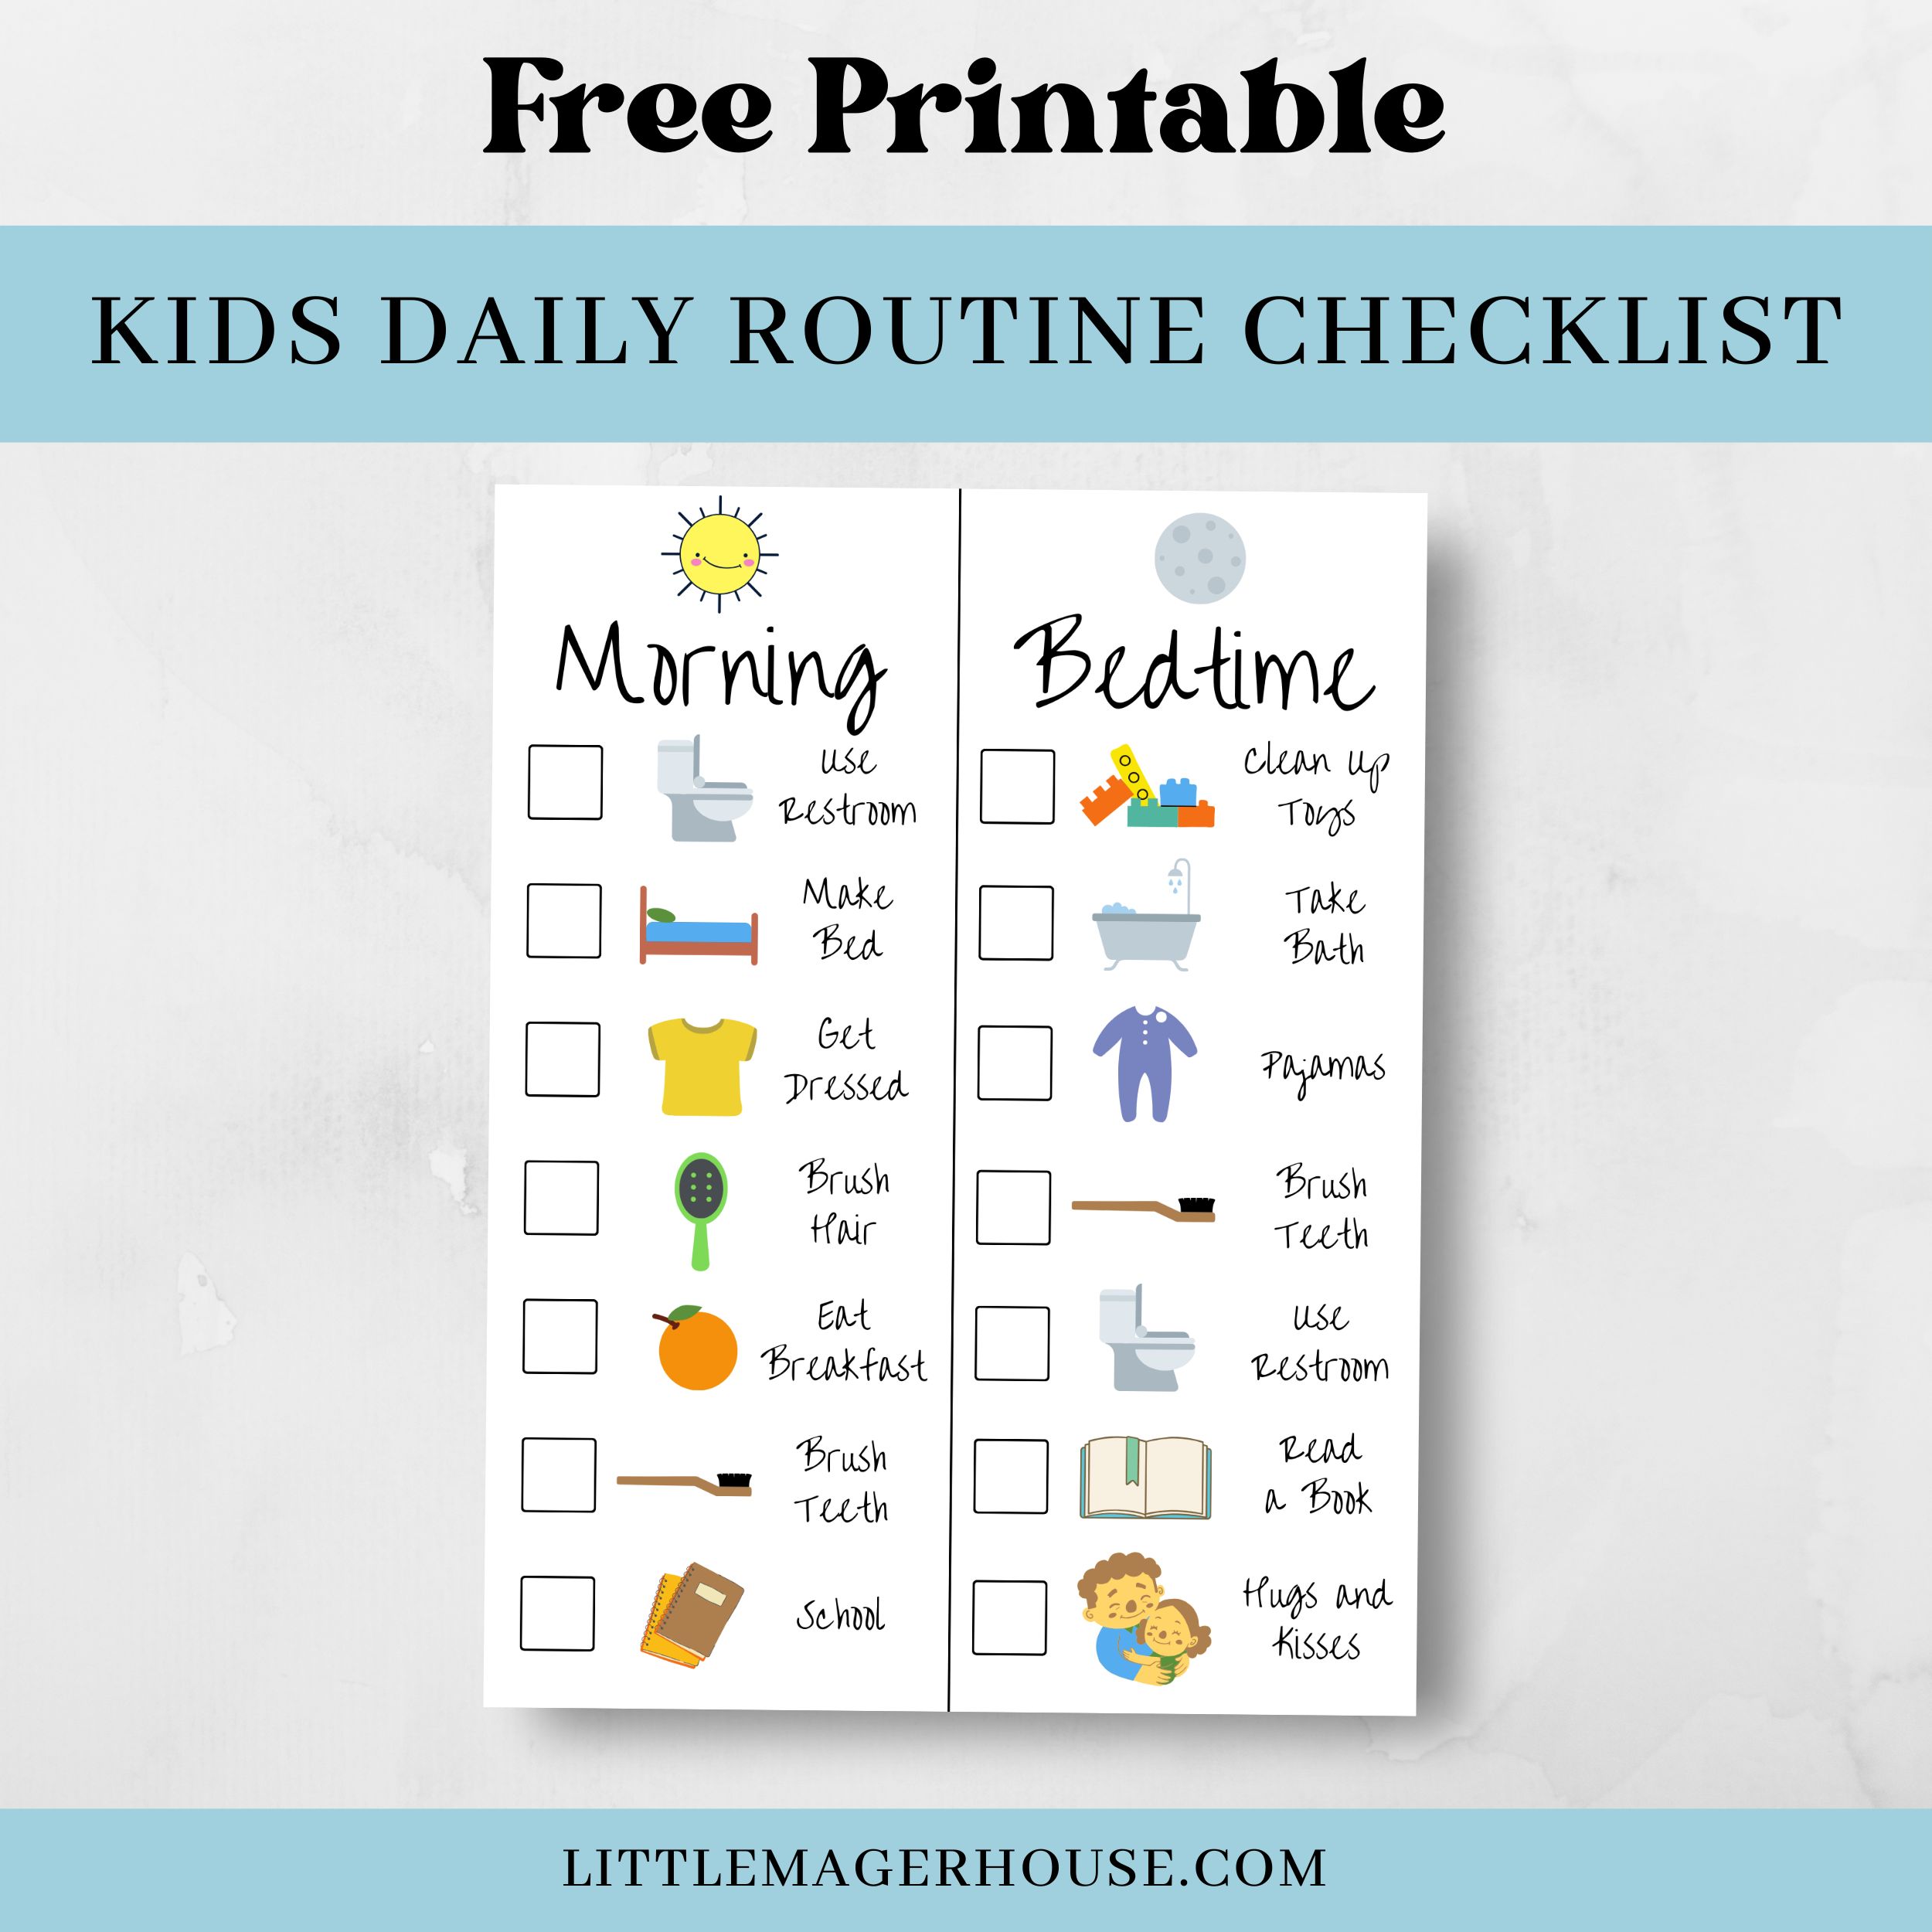 Free Printable Kids Daily Routine Checklist - Little Mager House